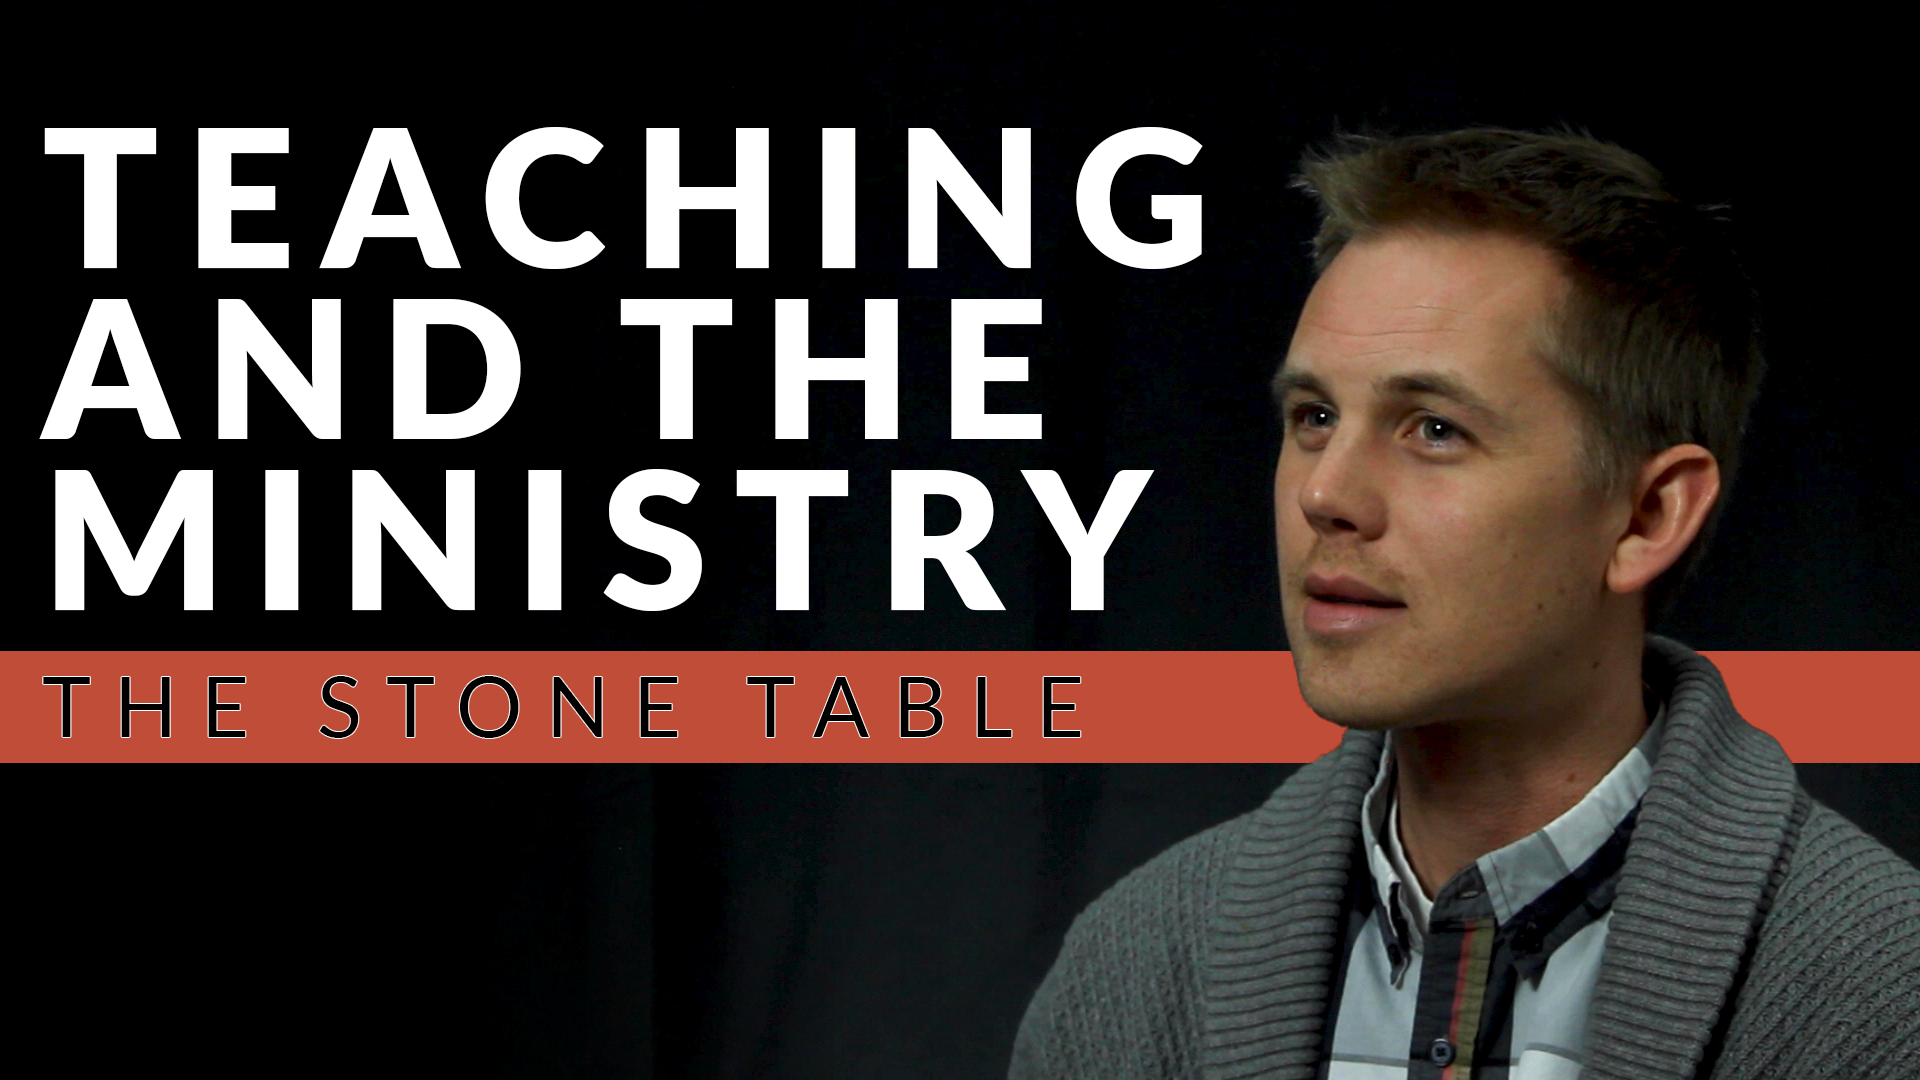 How Does Your Role as a Teacher Connect You to Your Faith?